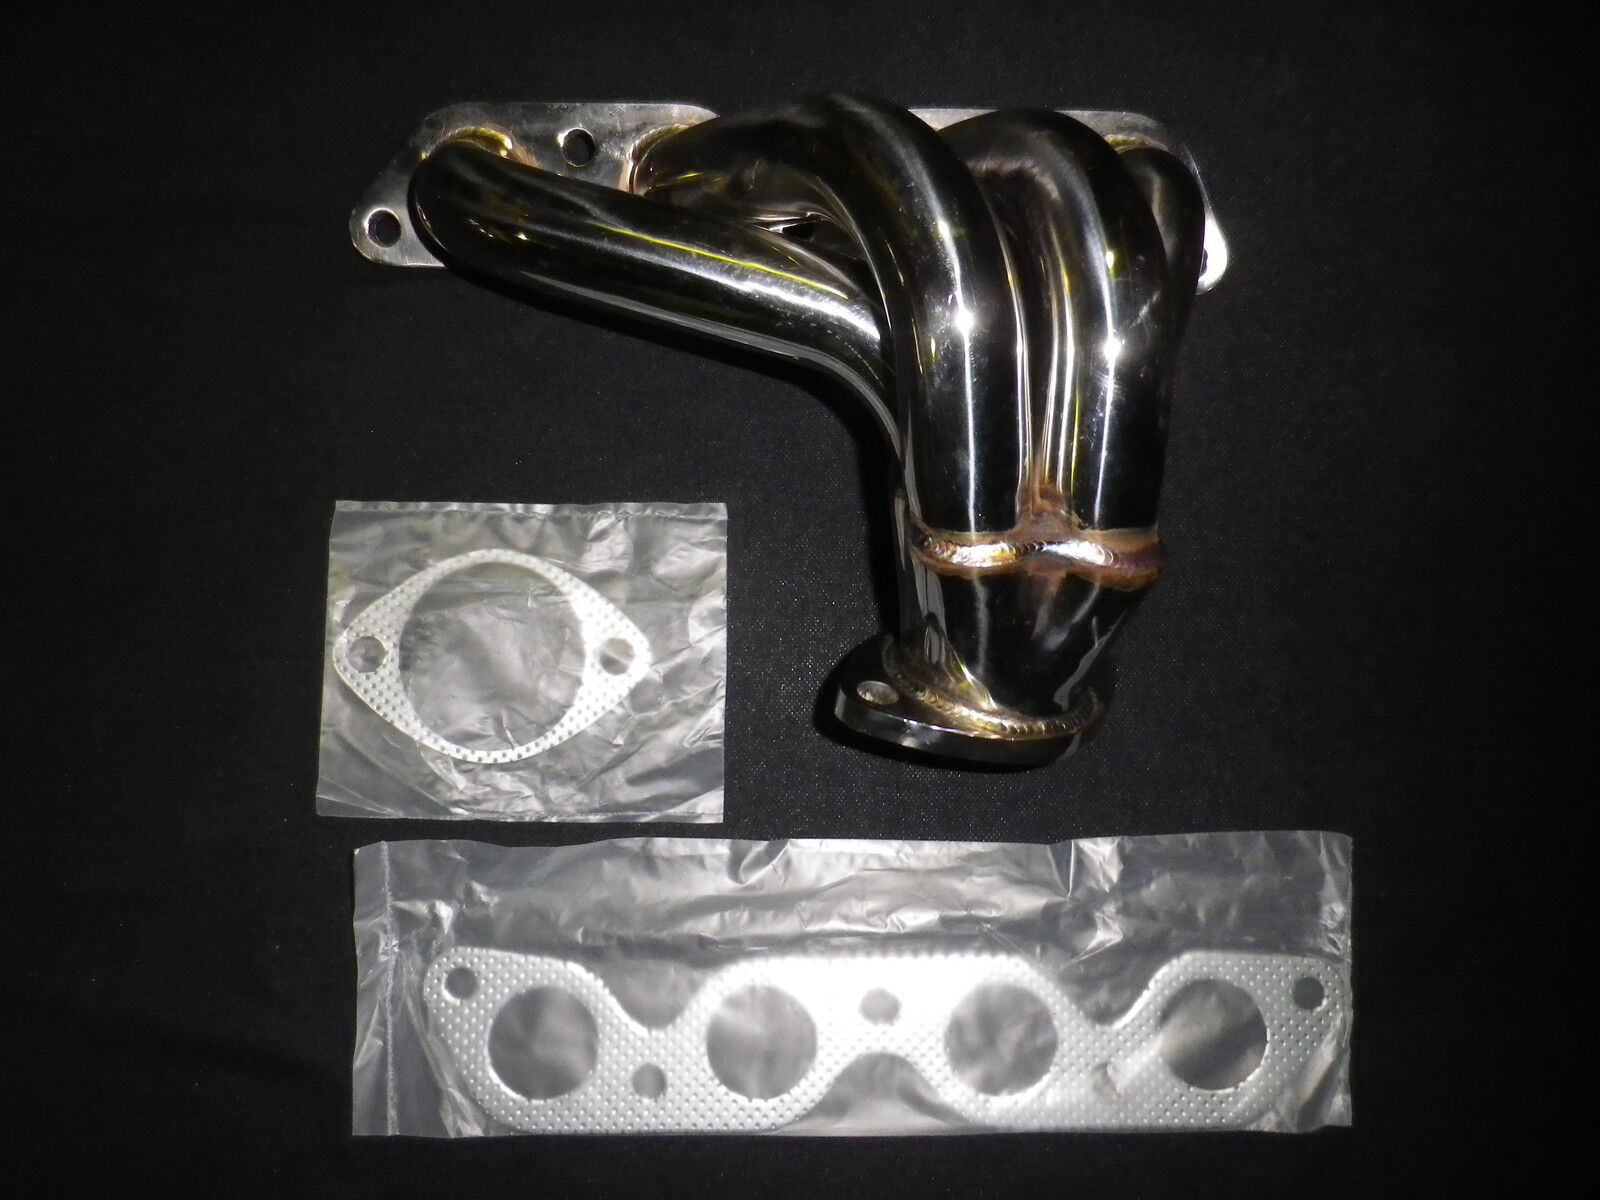 FITS TOYOTA COROLLA AE90-92-101 86/98 (4AFE) 1.6LTR STAINLESS HEADERS (070)